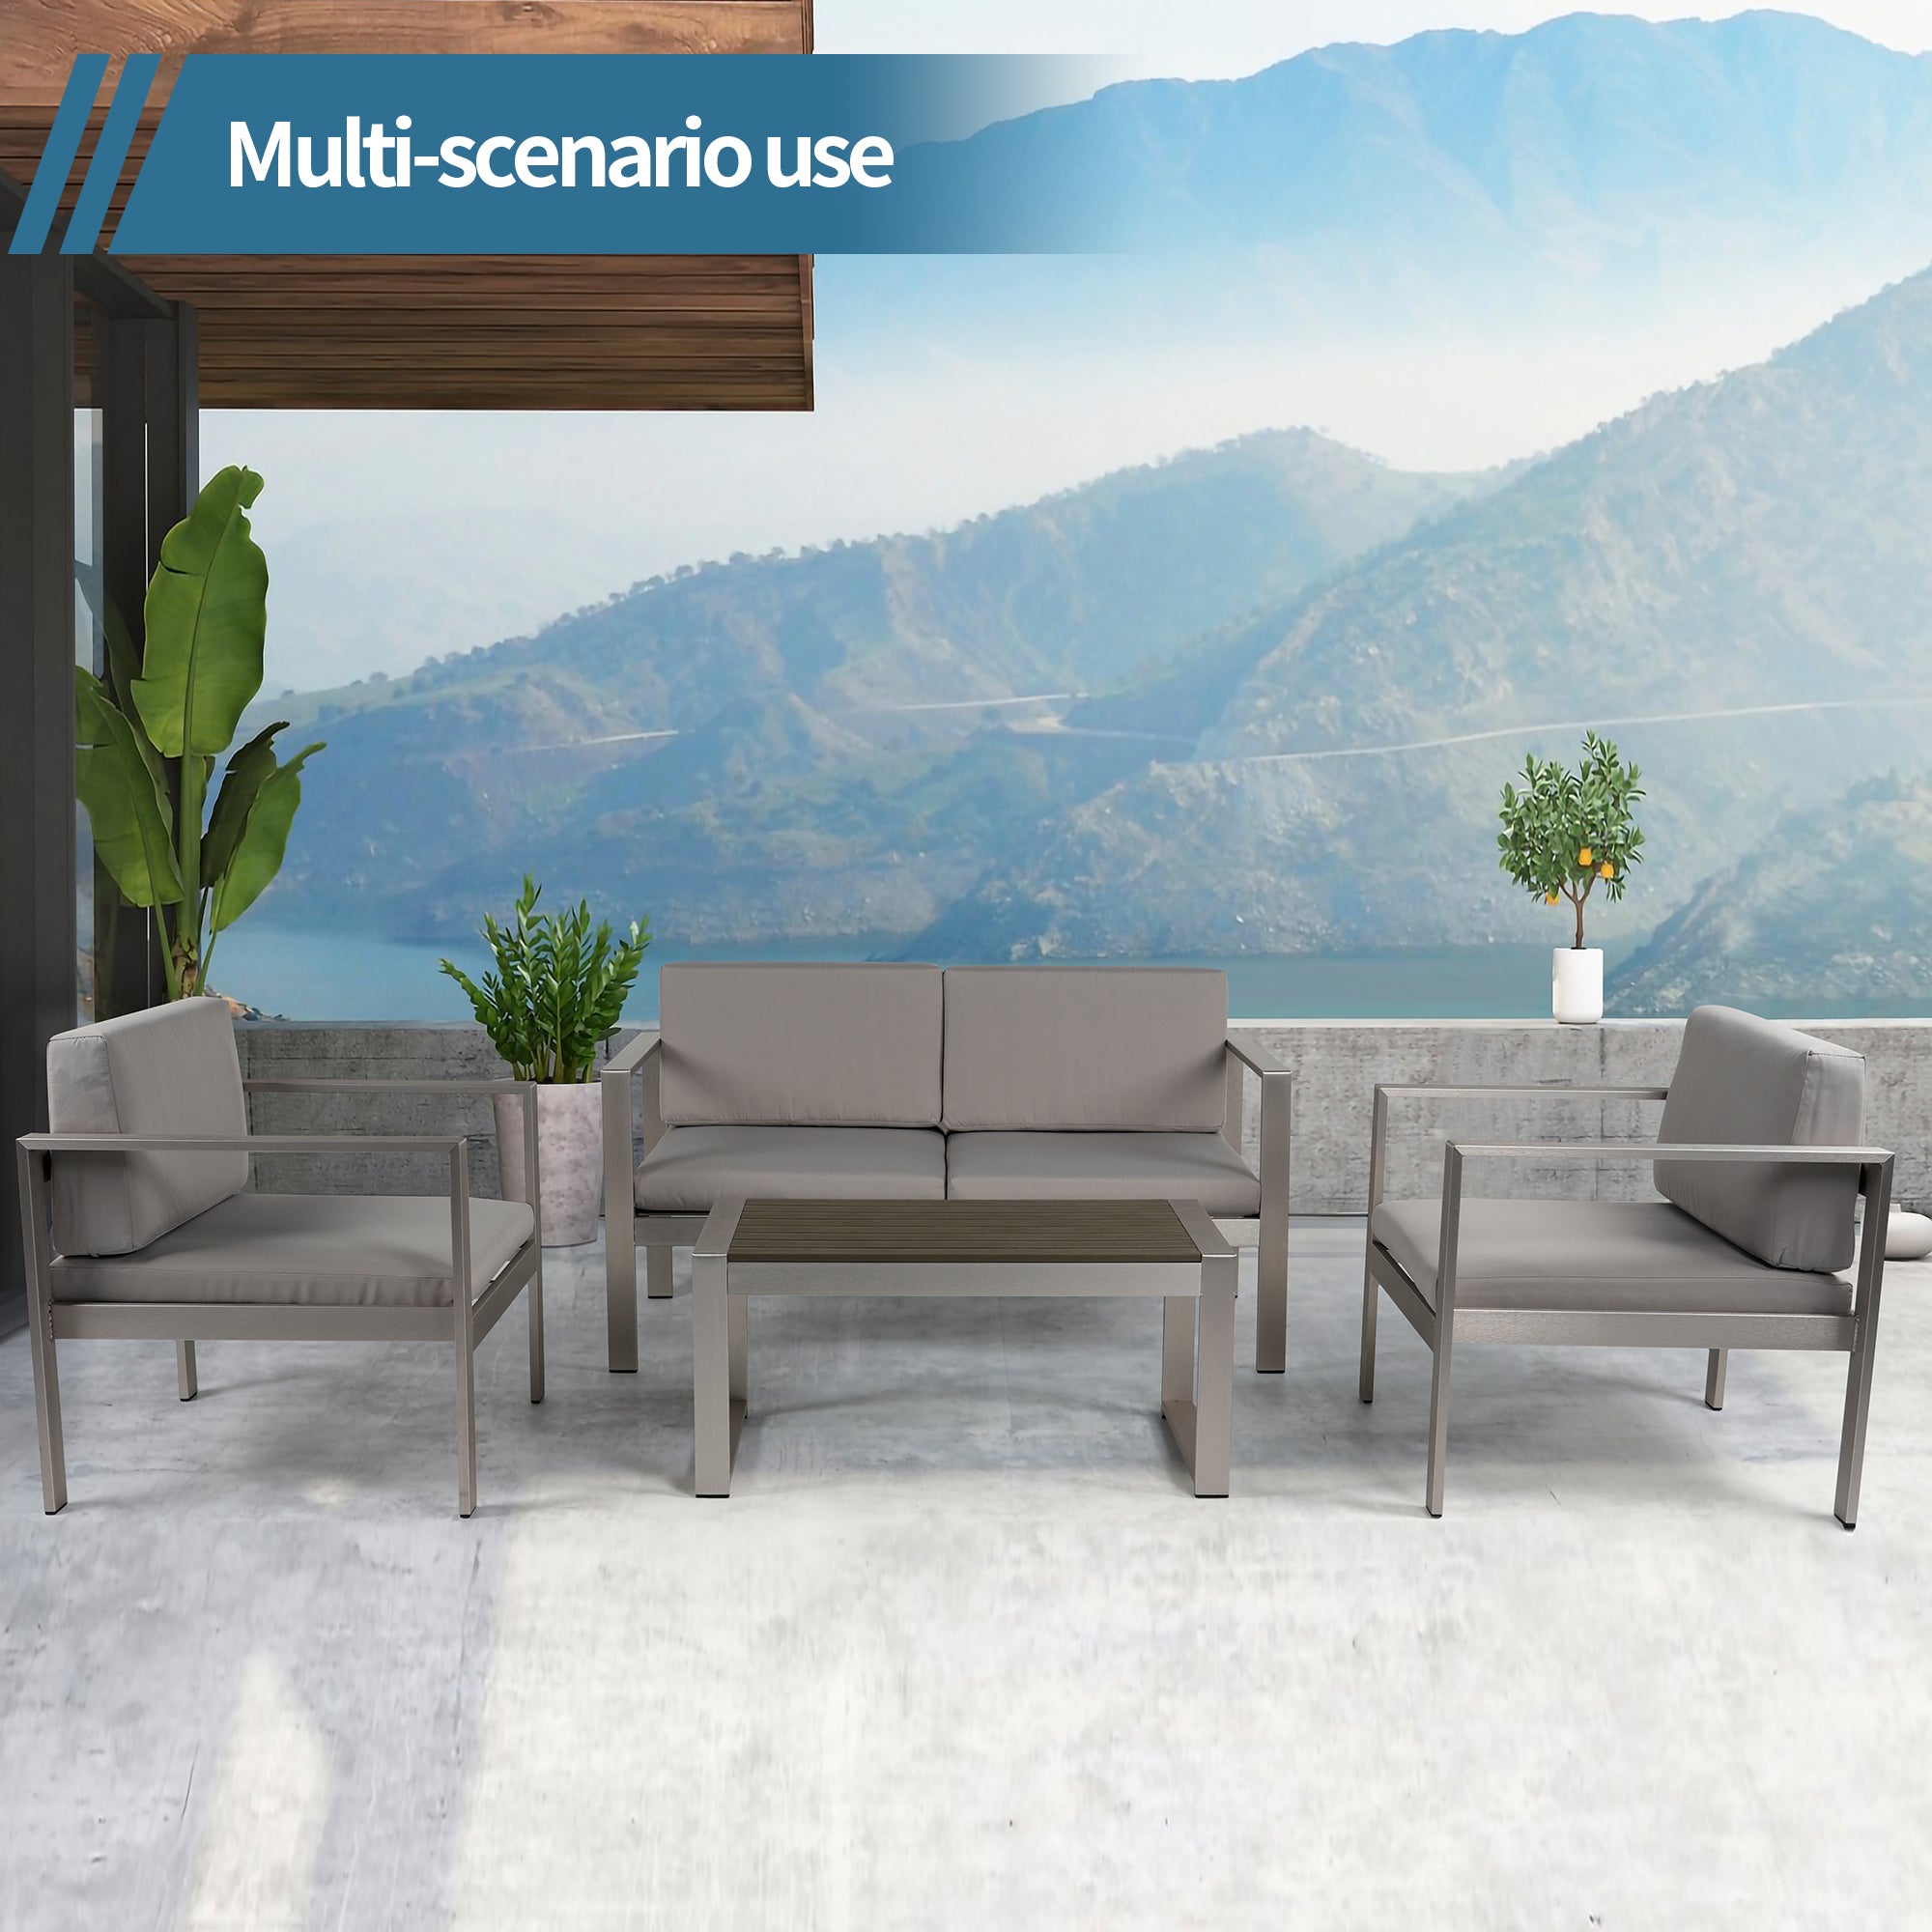 Aluminum Modern 4 Piece Sofa Seating Group For Patio yes-complete patio set-gray+silver-mildew